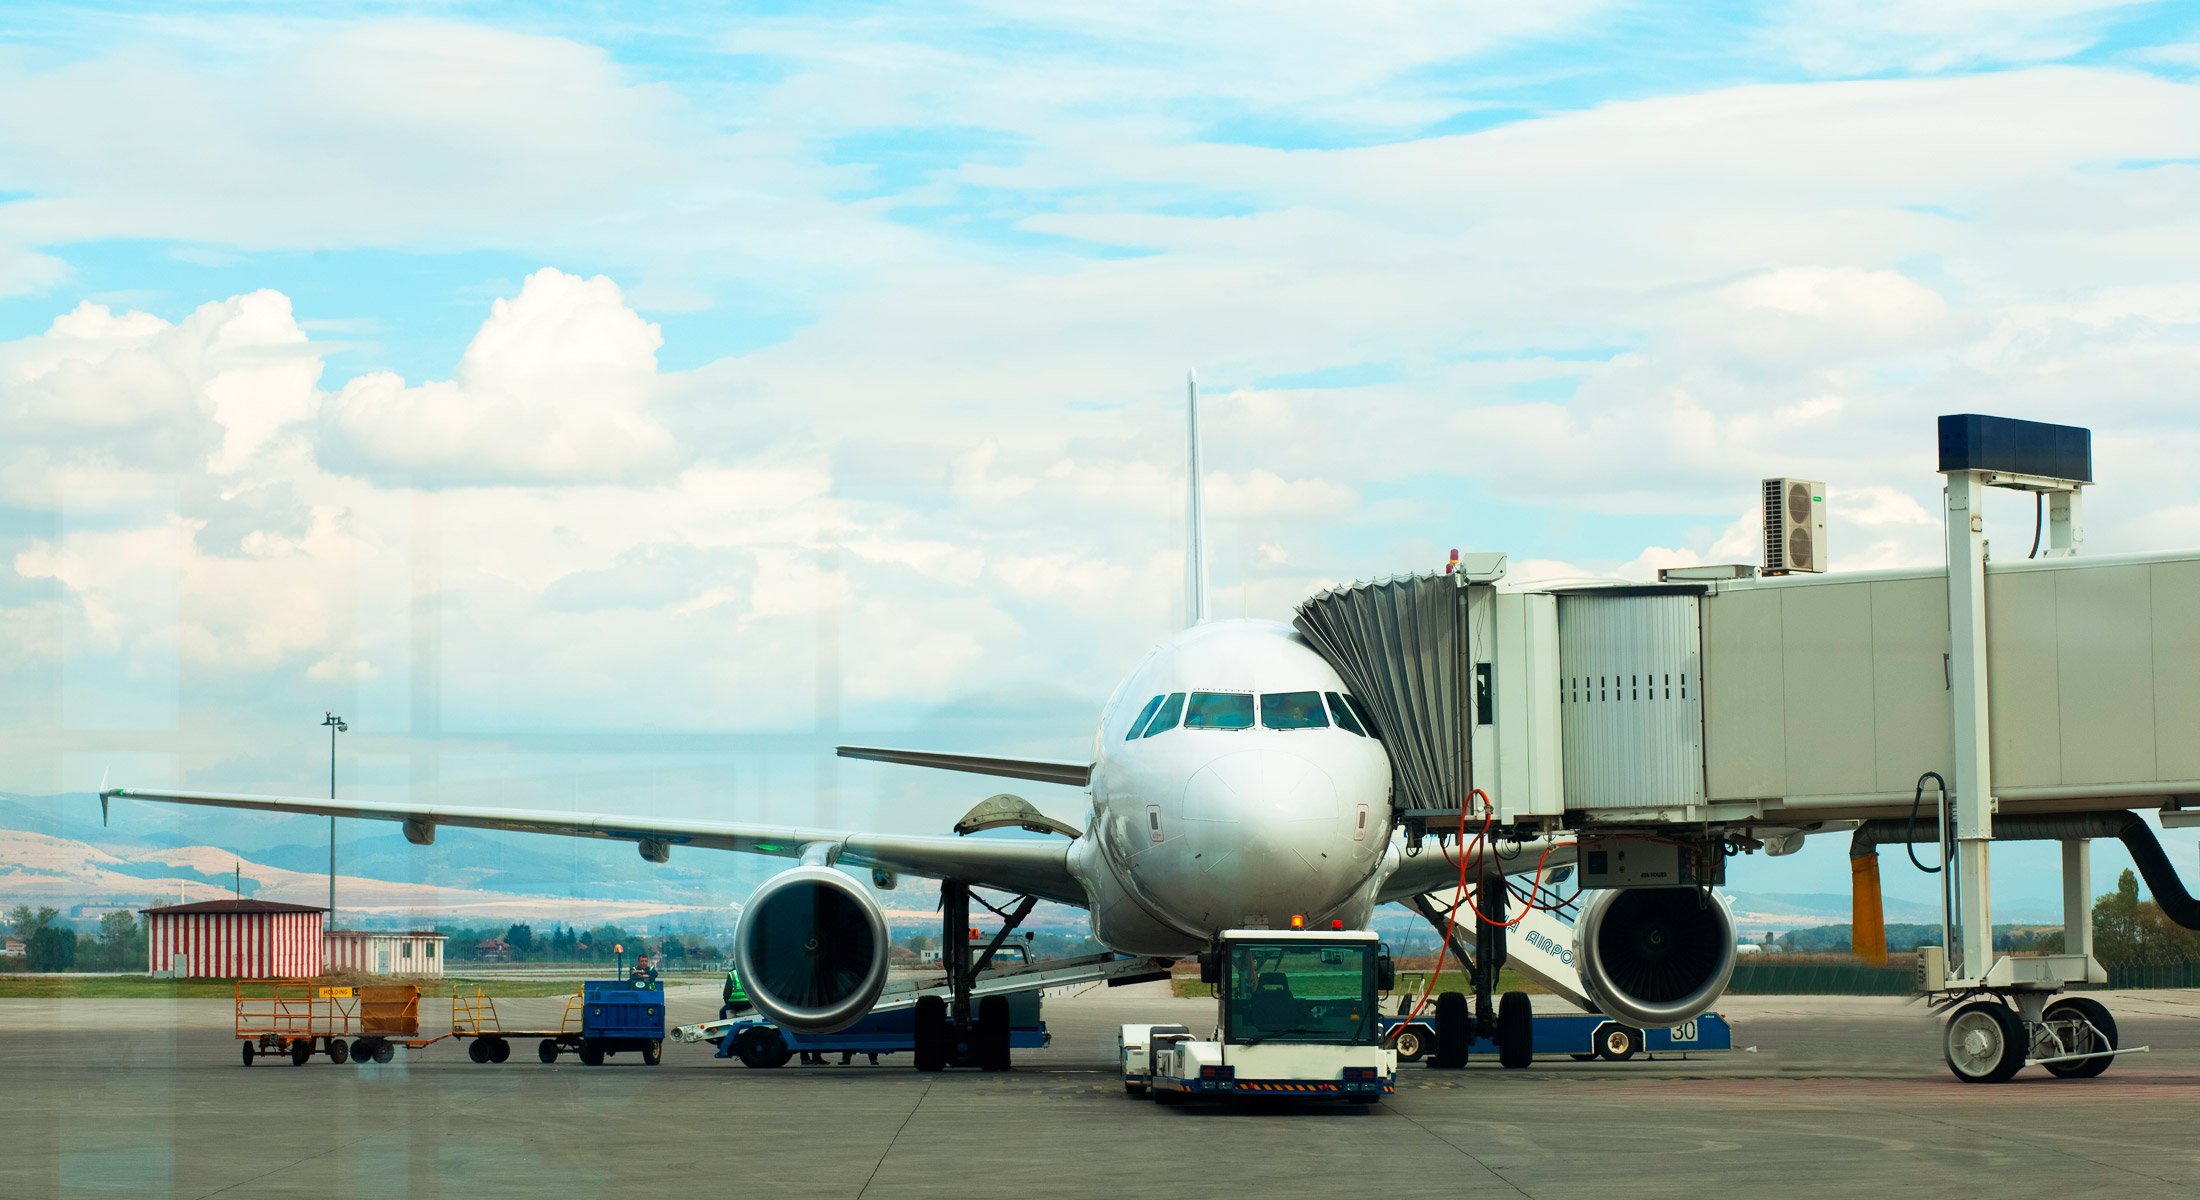 Costa Rica airports, everything you need to know about this